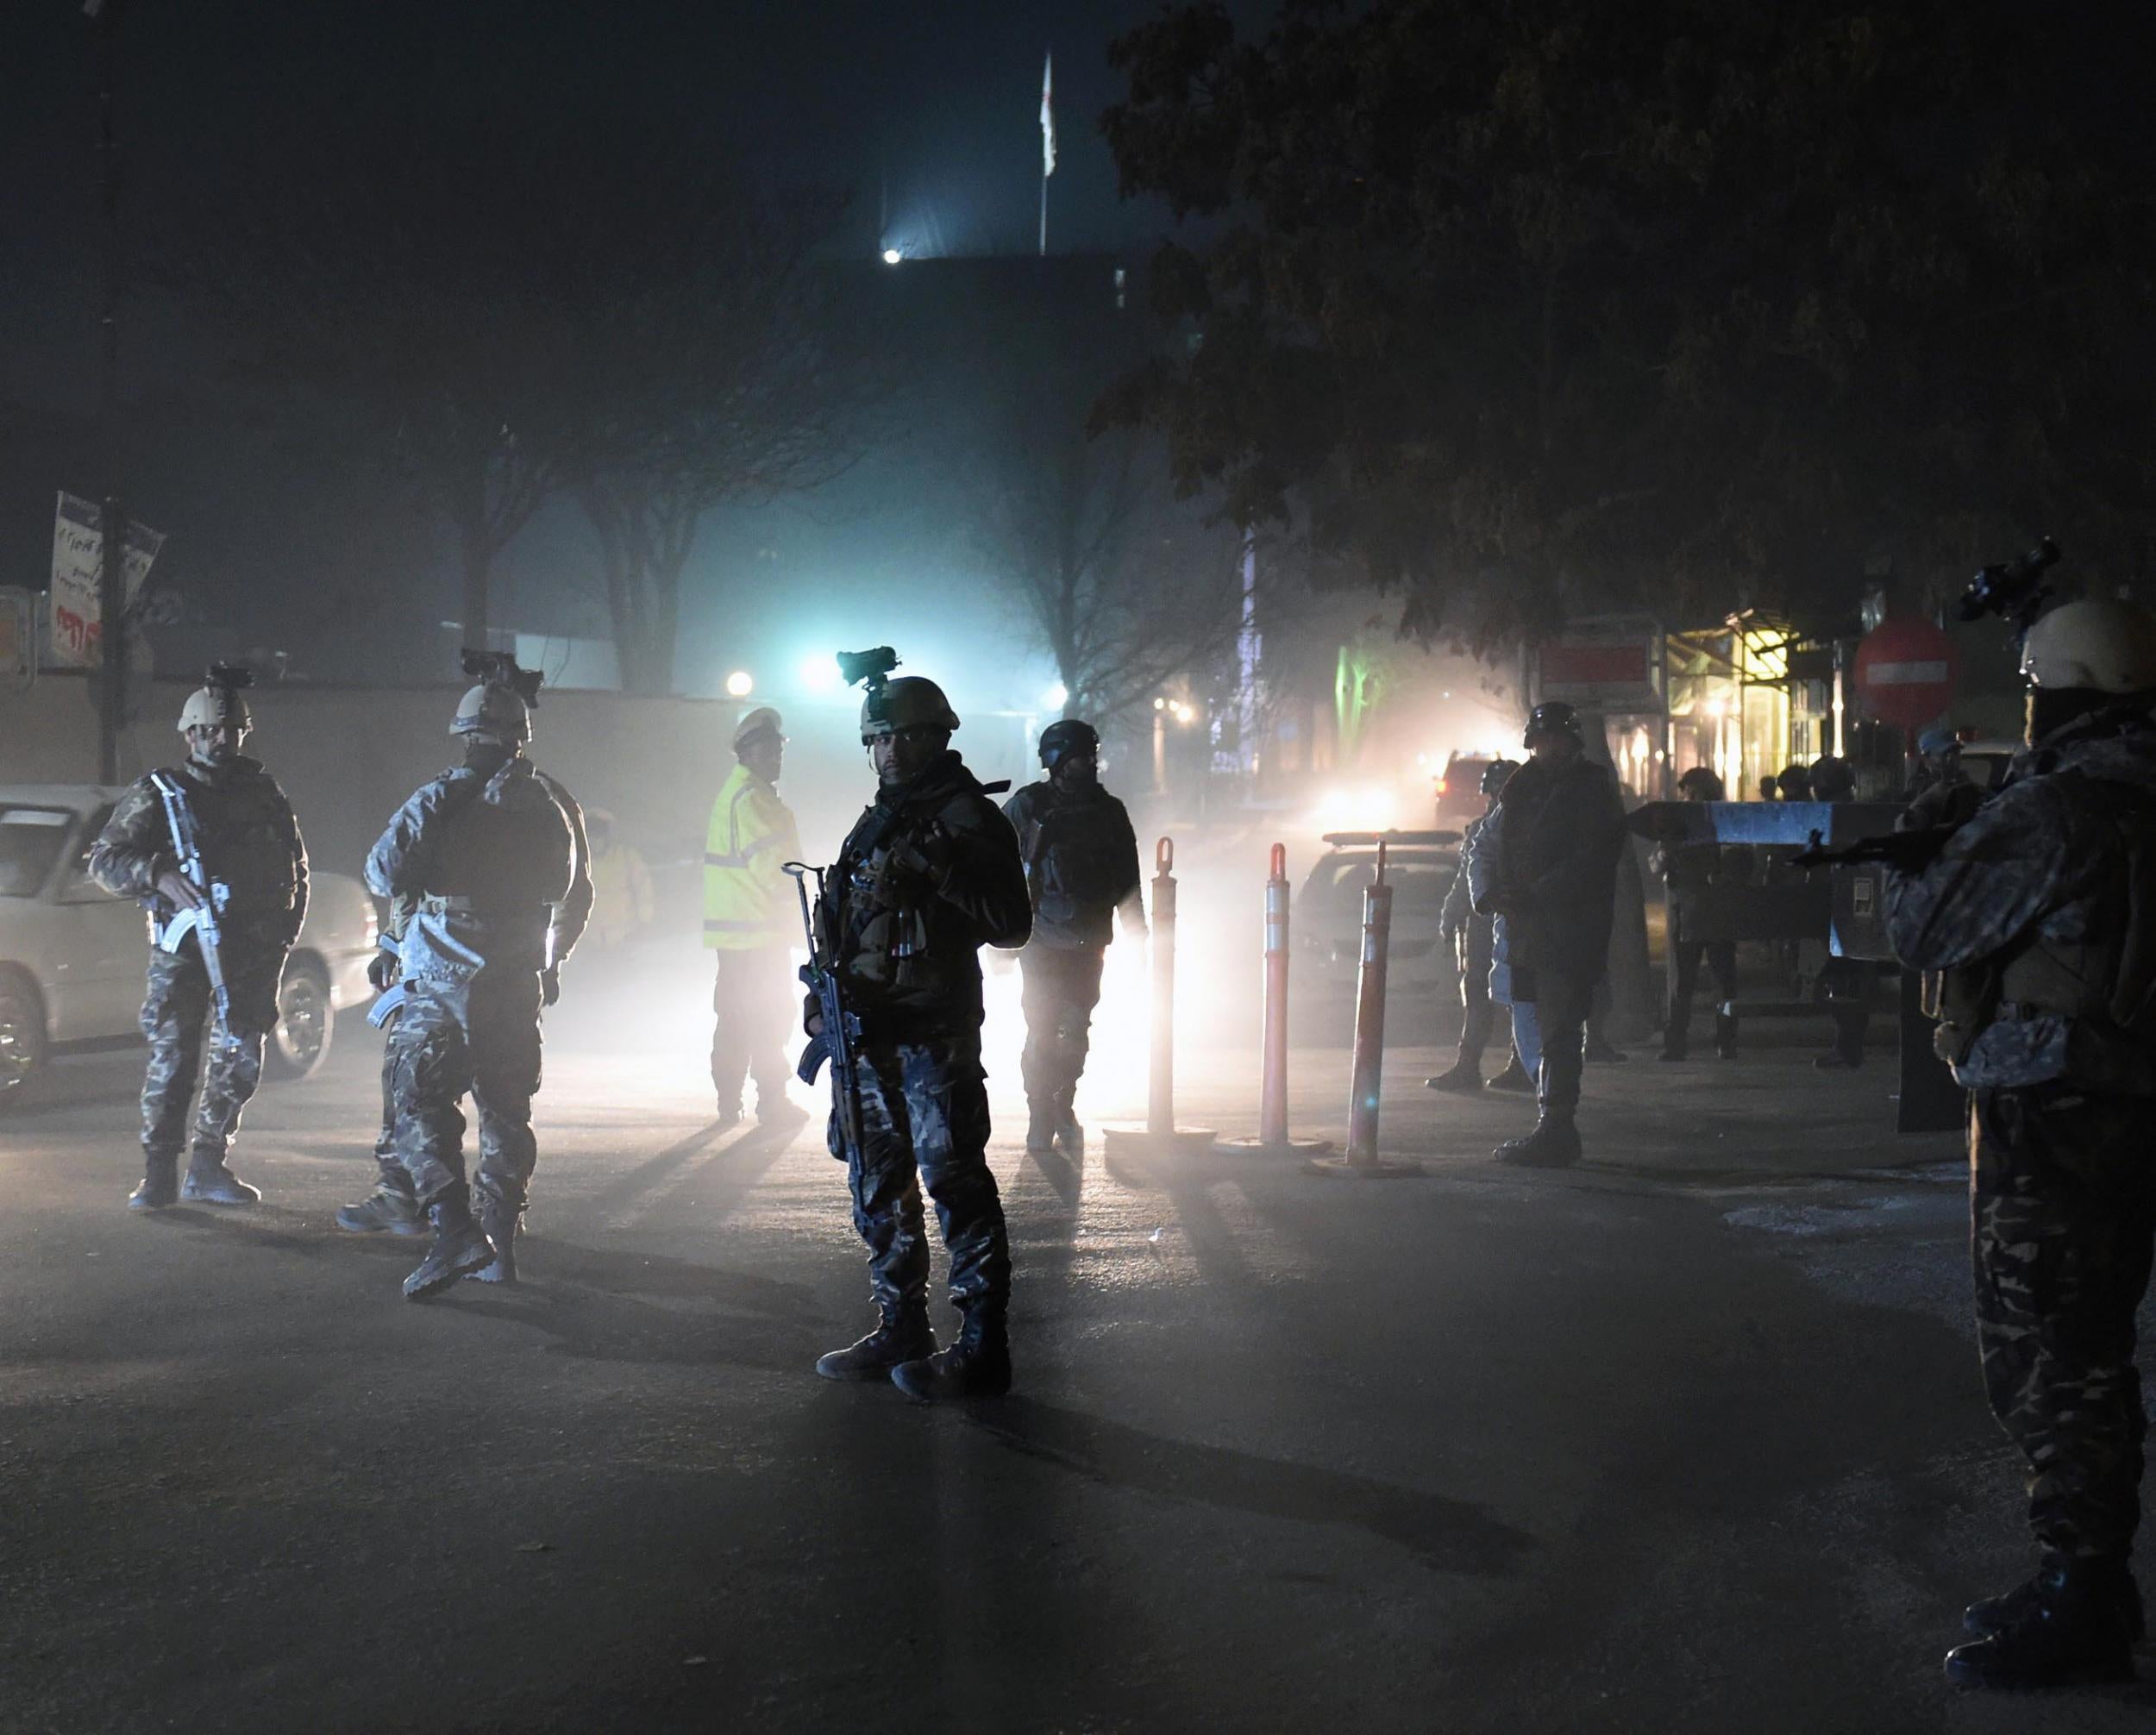 Afghan police outside the Spanish embassy attacked by Taliban fighters on Friday night